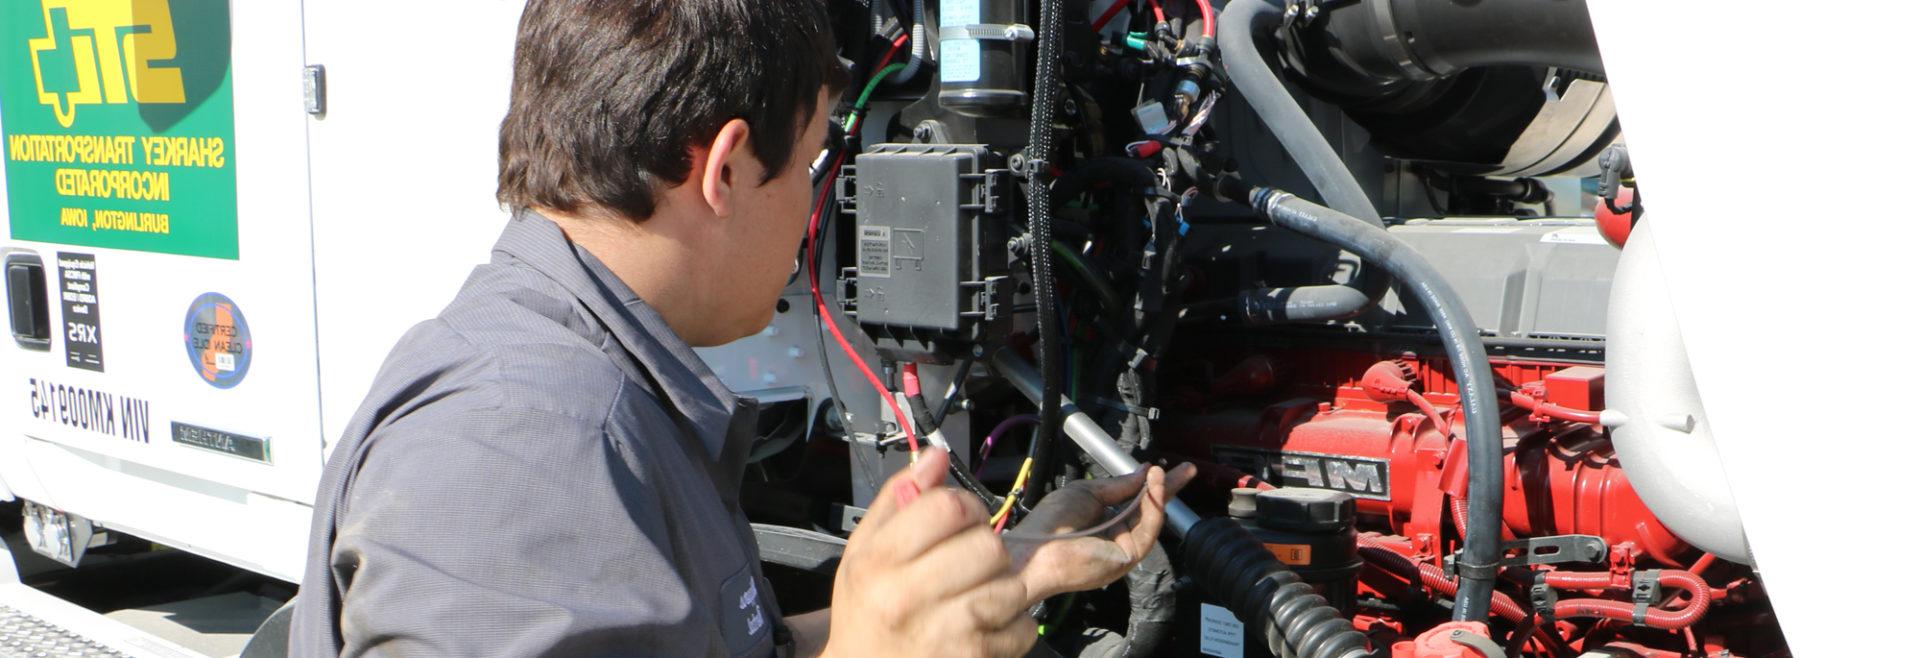 student working on a diesel